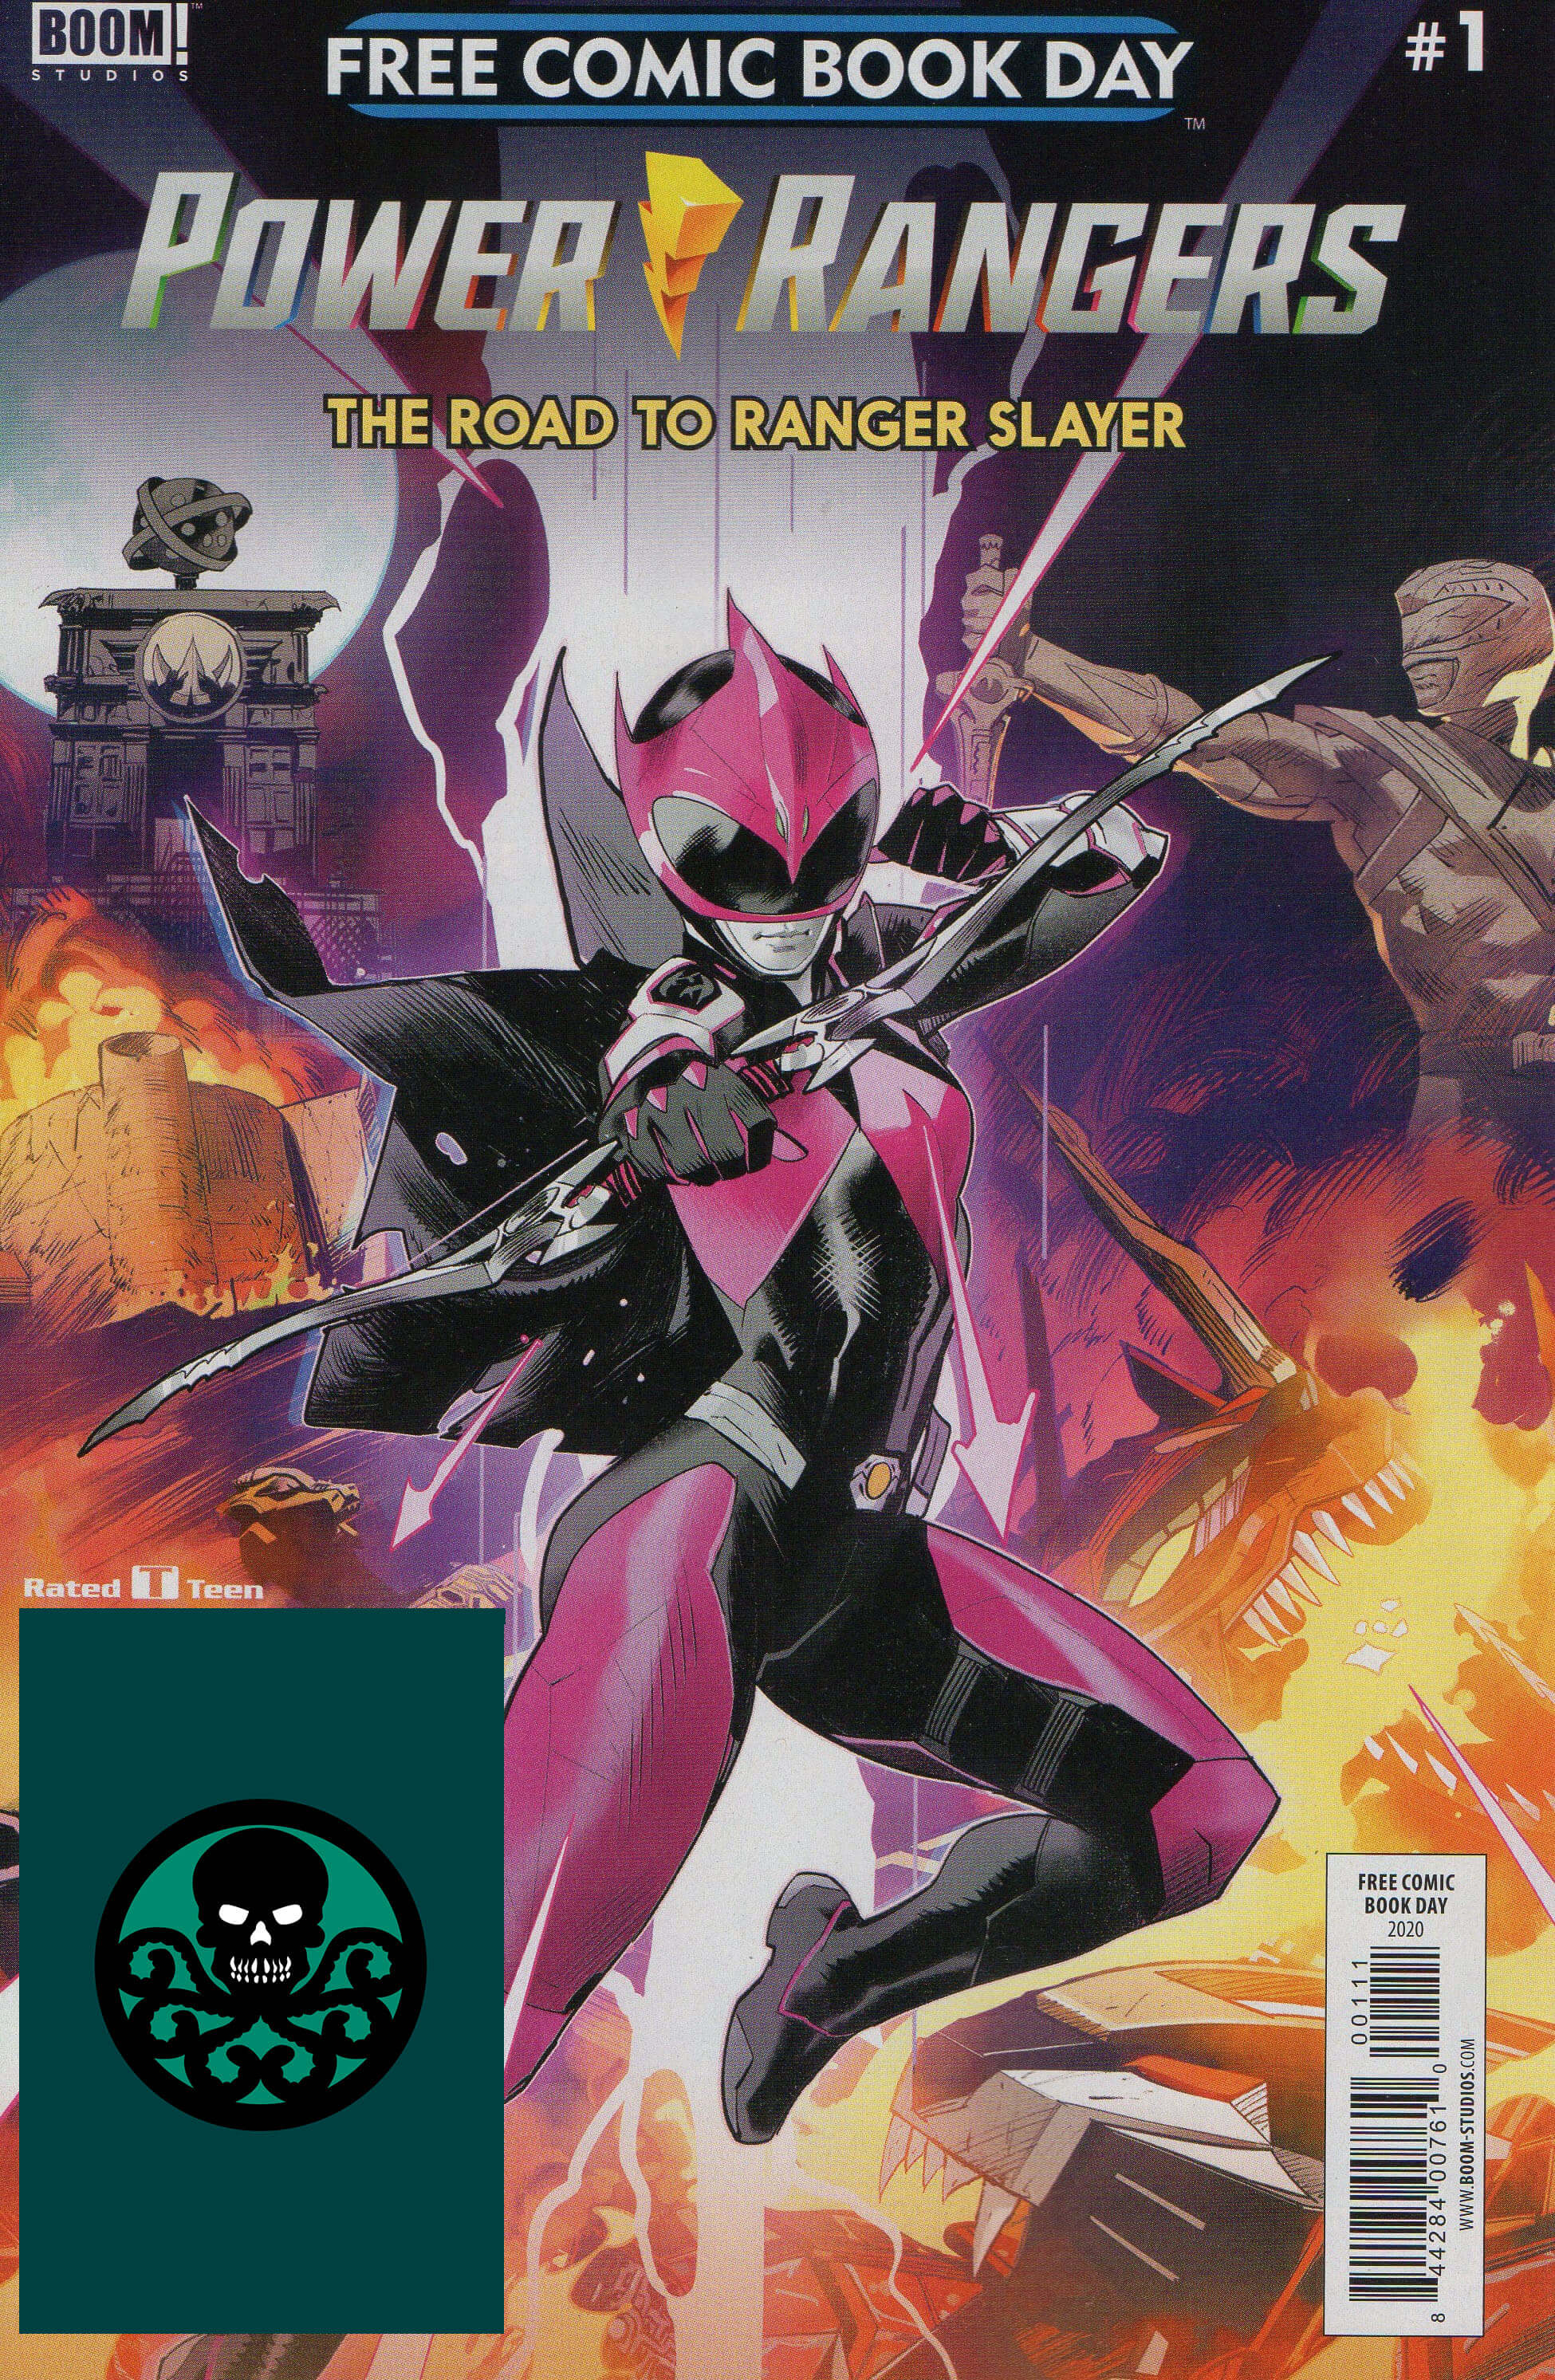 Read online Free Comic Book Day 2020 comic -  Issue # Power Rangers - Road to Ranger Slayer - 1